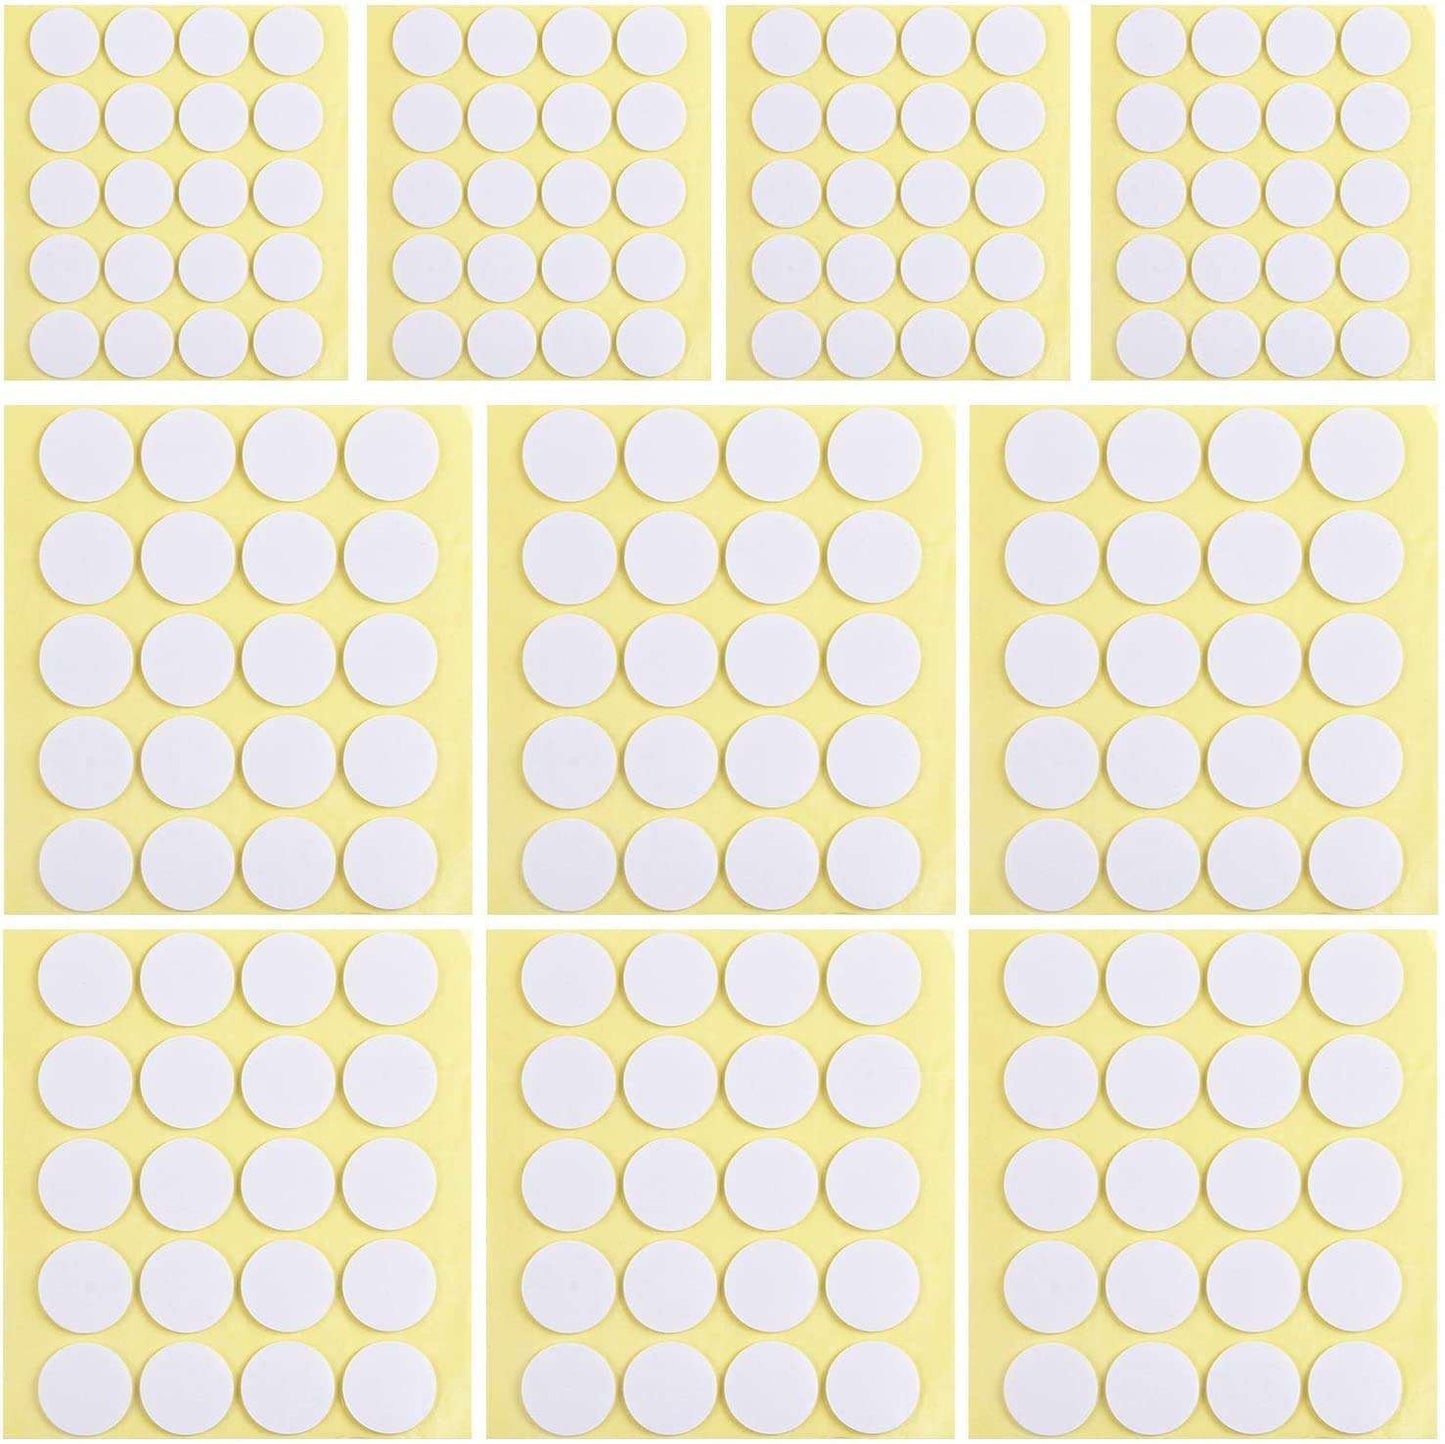 400pcs Candle Wick Stickers, Heat Resistance Candle Making Double-Sided Stickers - Hatke